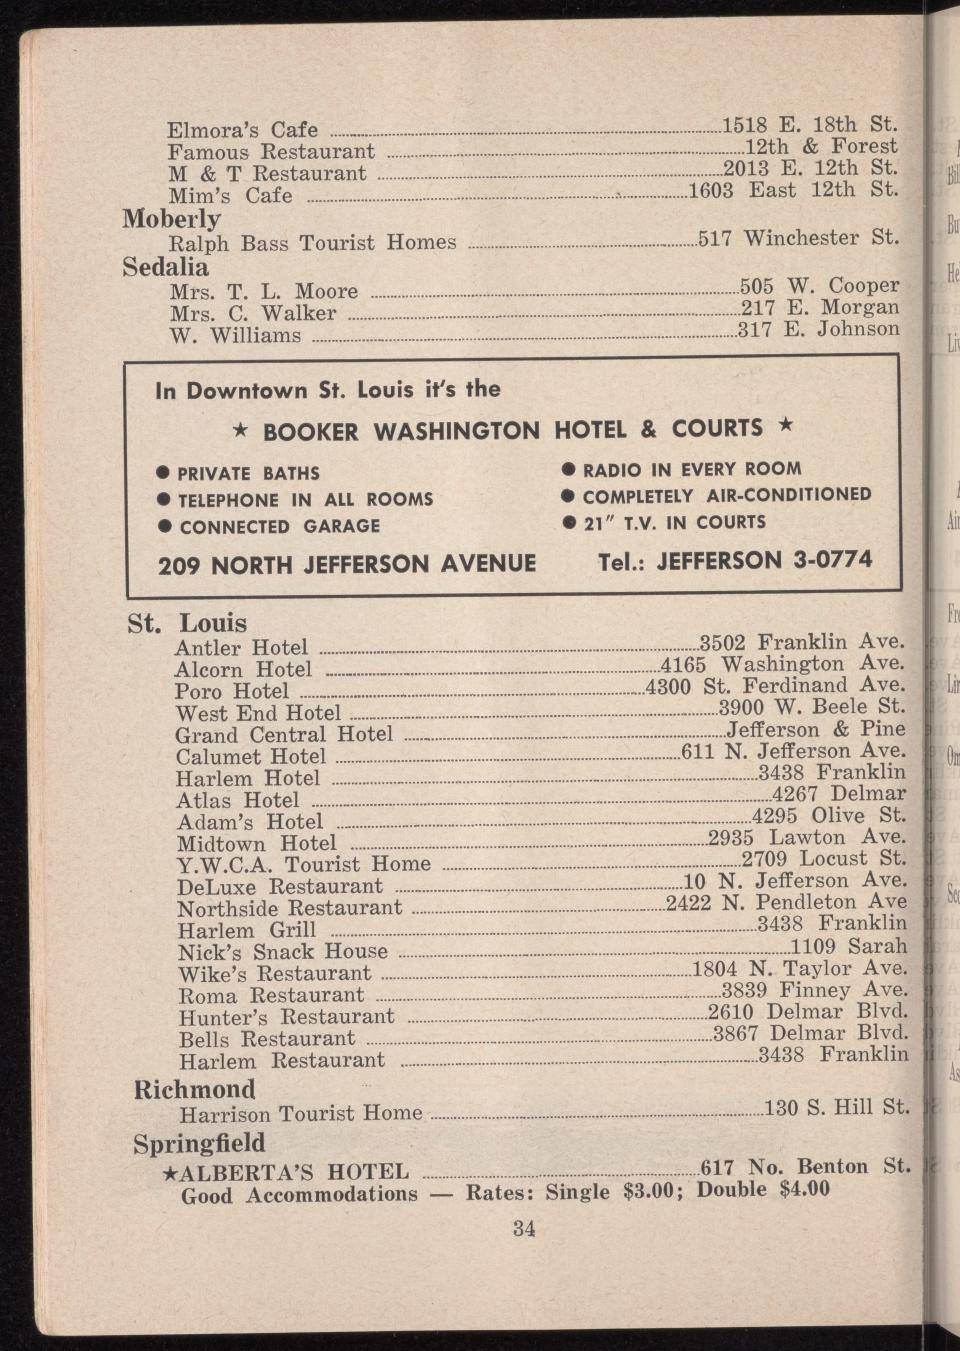 This page of the 1956 edition of The Green Book listed hotels and other businesses that offered hospitality to African Americans, including Alberta’s Hotel, owned by Springfield entrepreneur Alberta Ellis. The Green Book was a resource for Black families in an era when racism, segregation and “sundown towns” were rampant in the United States.